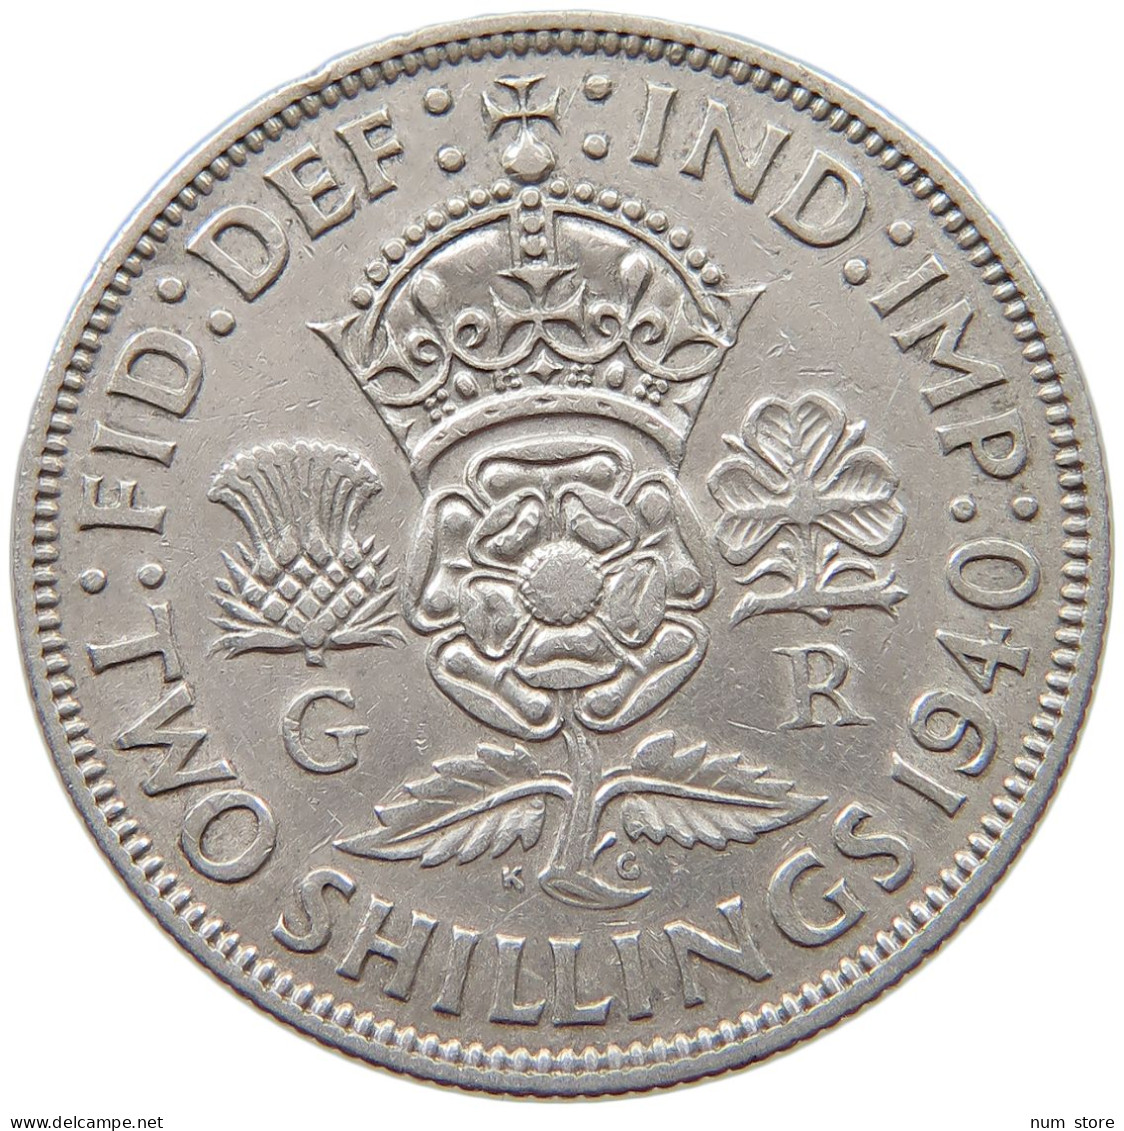 GREAT BRITAIN TWO SHILLINGS 1940 George VI. (1936-1952) #s049 0029 - J. 1 Florin / 2 Schillings